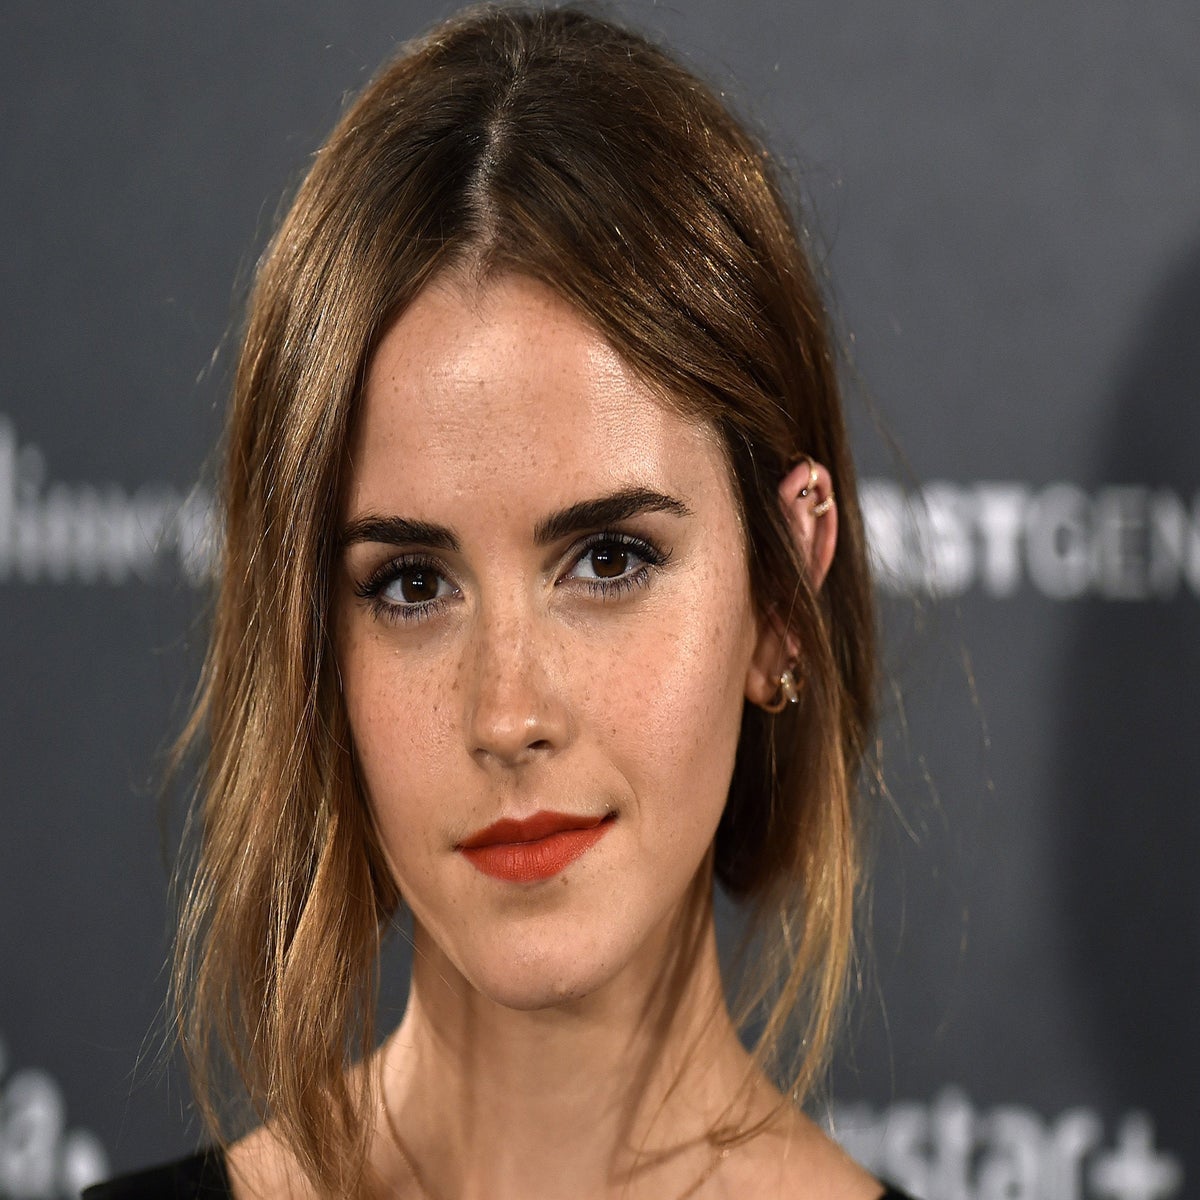 Emma Watson reacts to headlines sexualising her: 'It's deeply ...